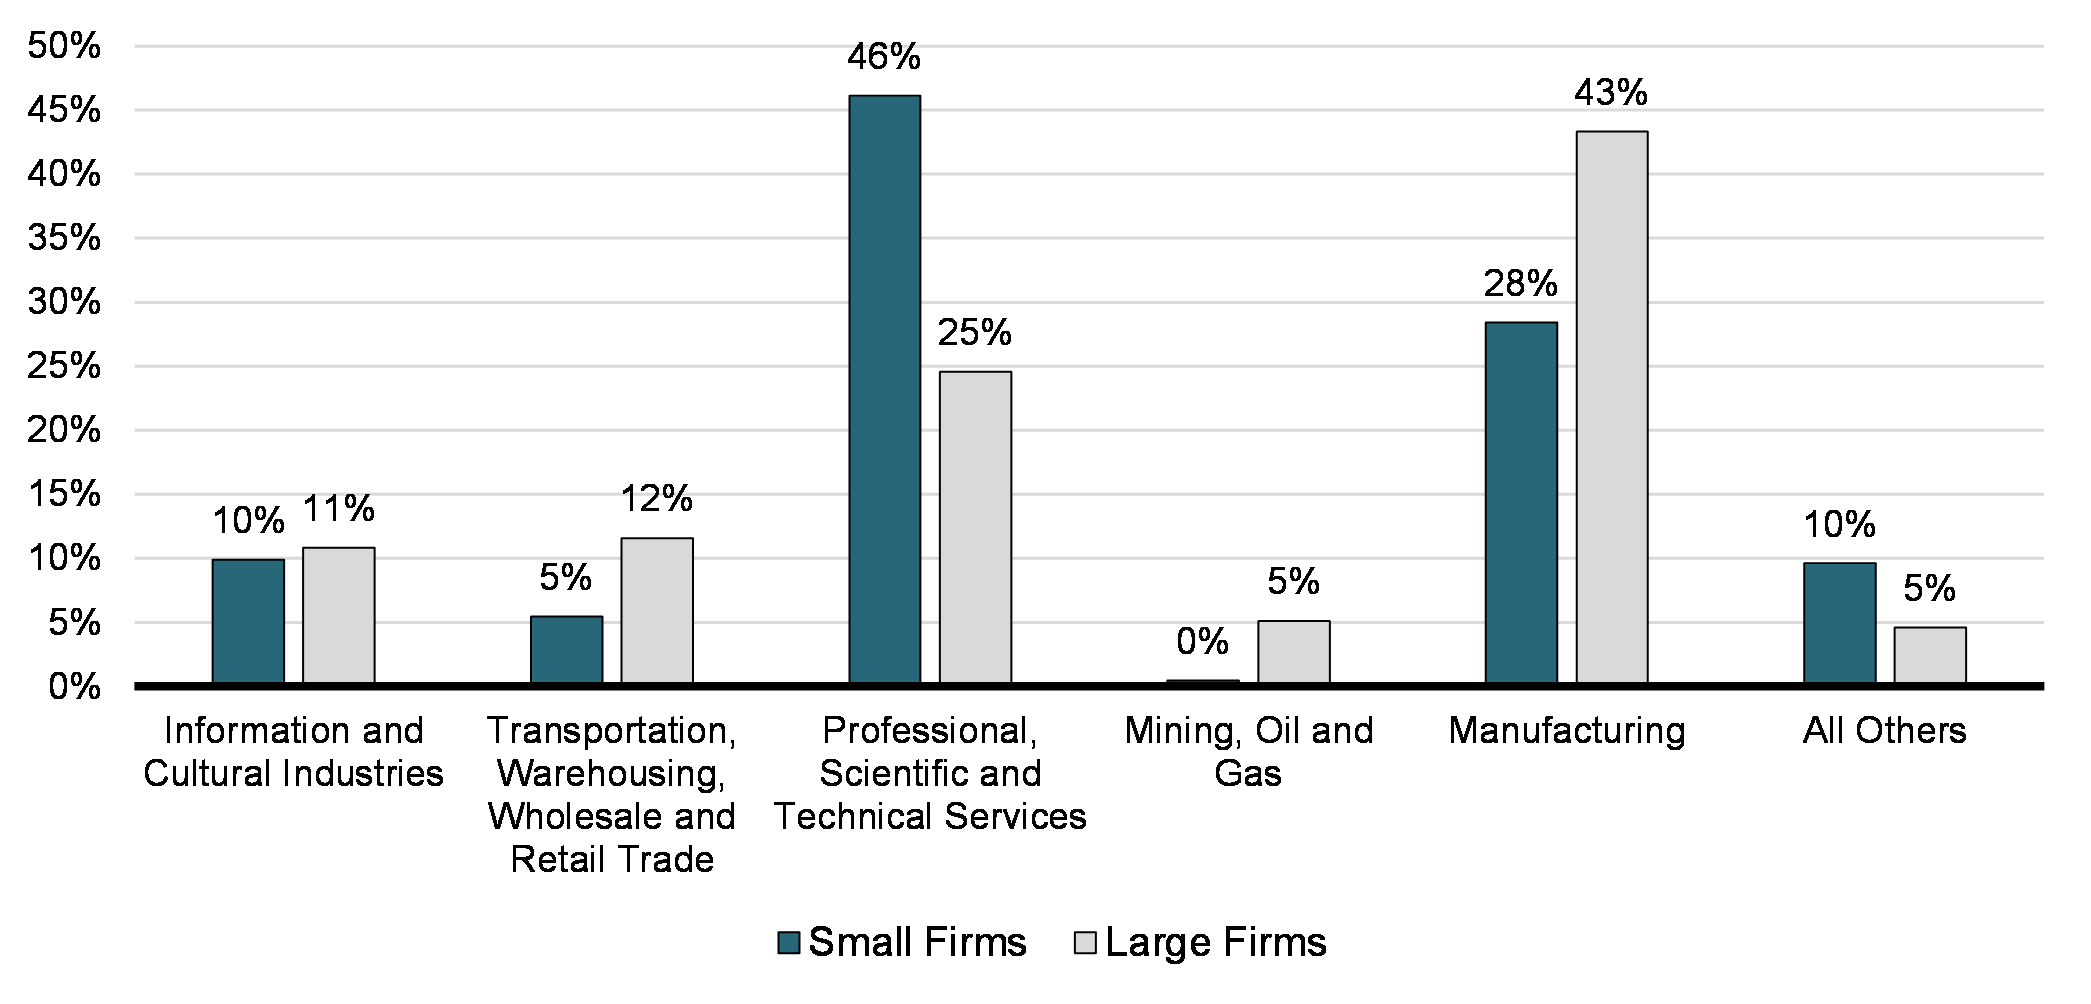 Chart 4: Distribution of SR&ED Expenditures by Small and Large Firms Among Various Industries, 2016